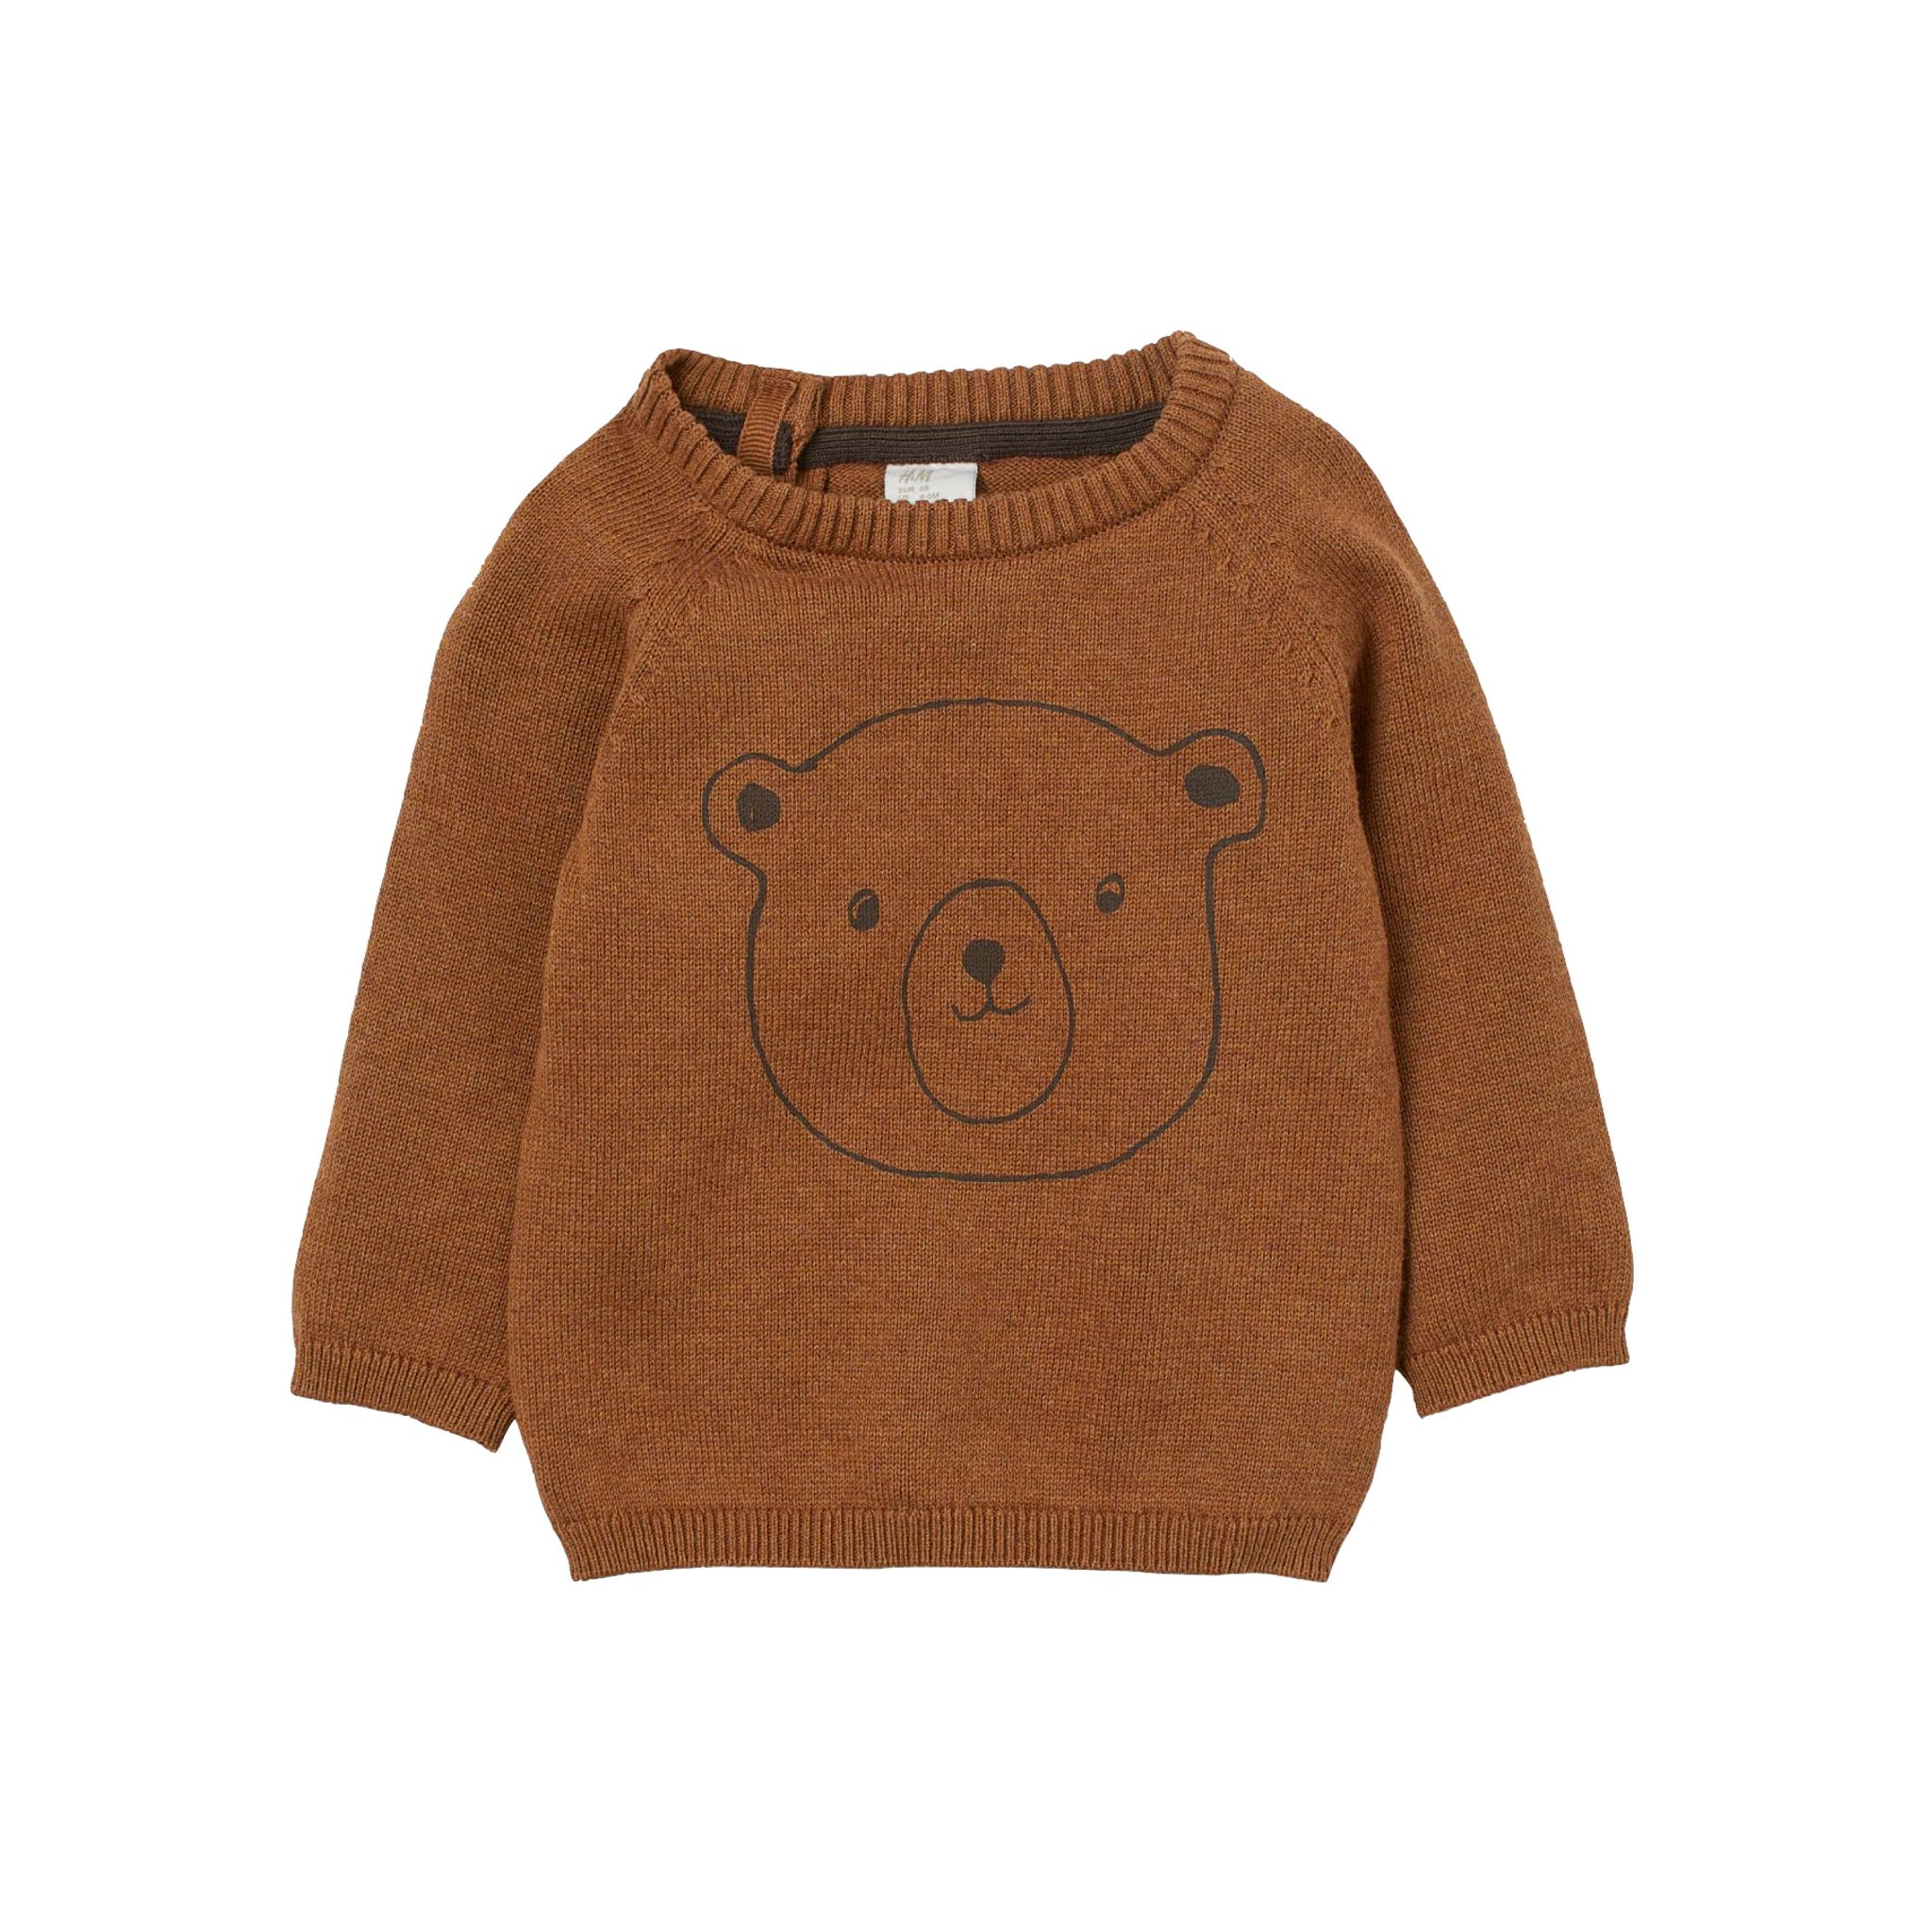 Brown Toddler Cotton Sweater from H&M Kids